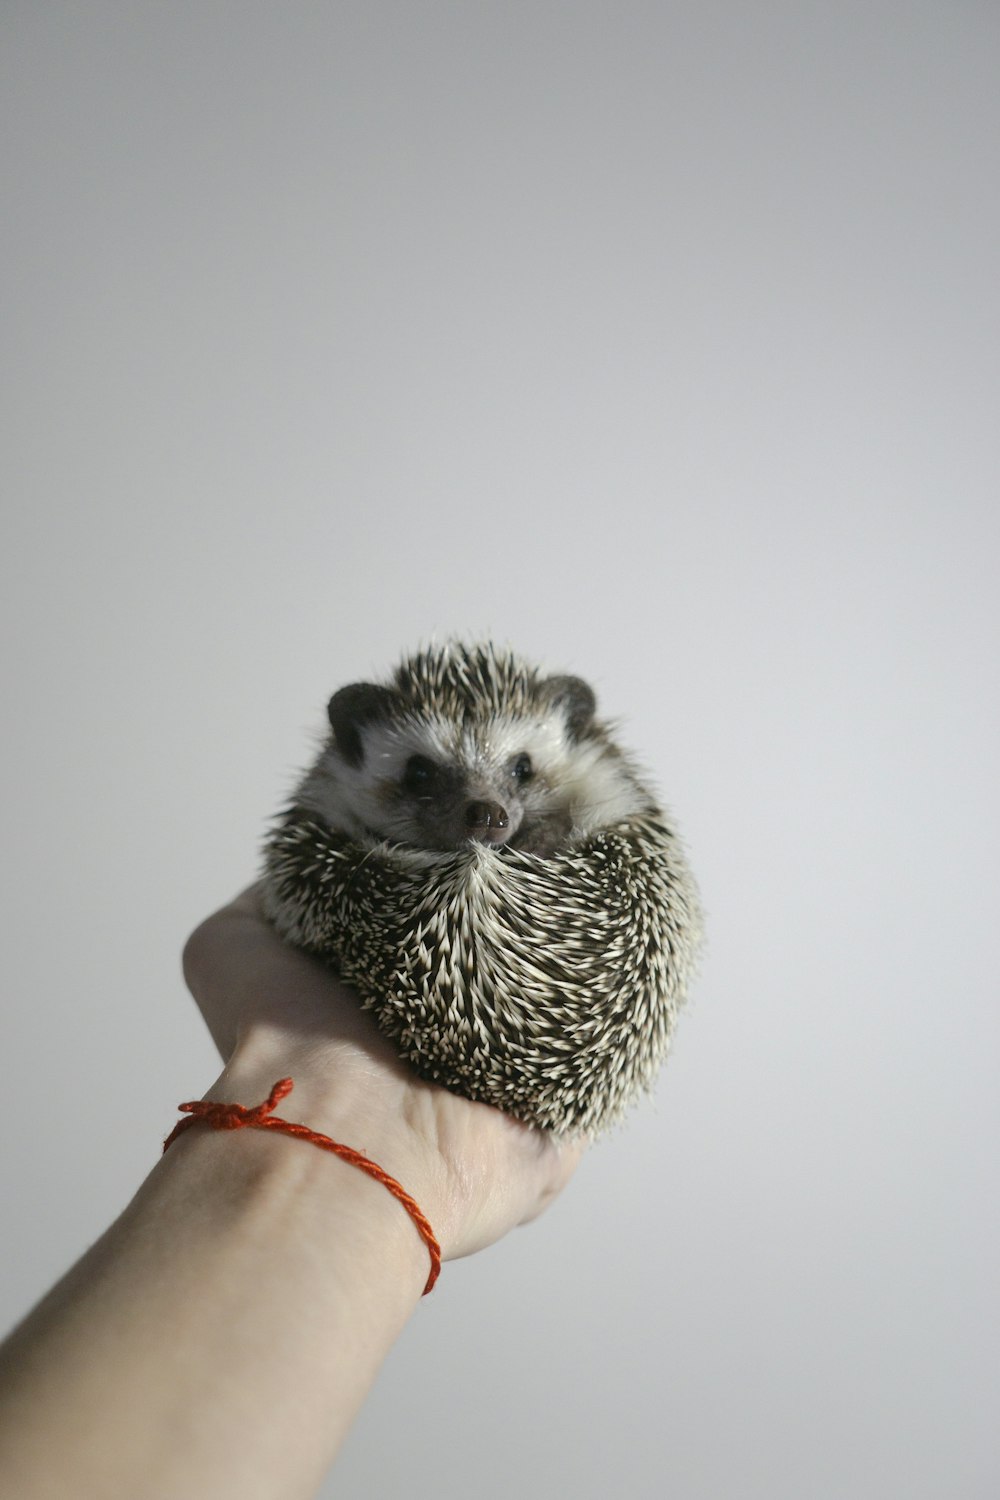 white and black hedgehog on persons hand